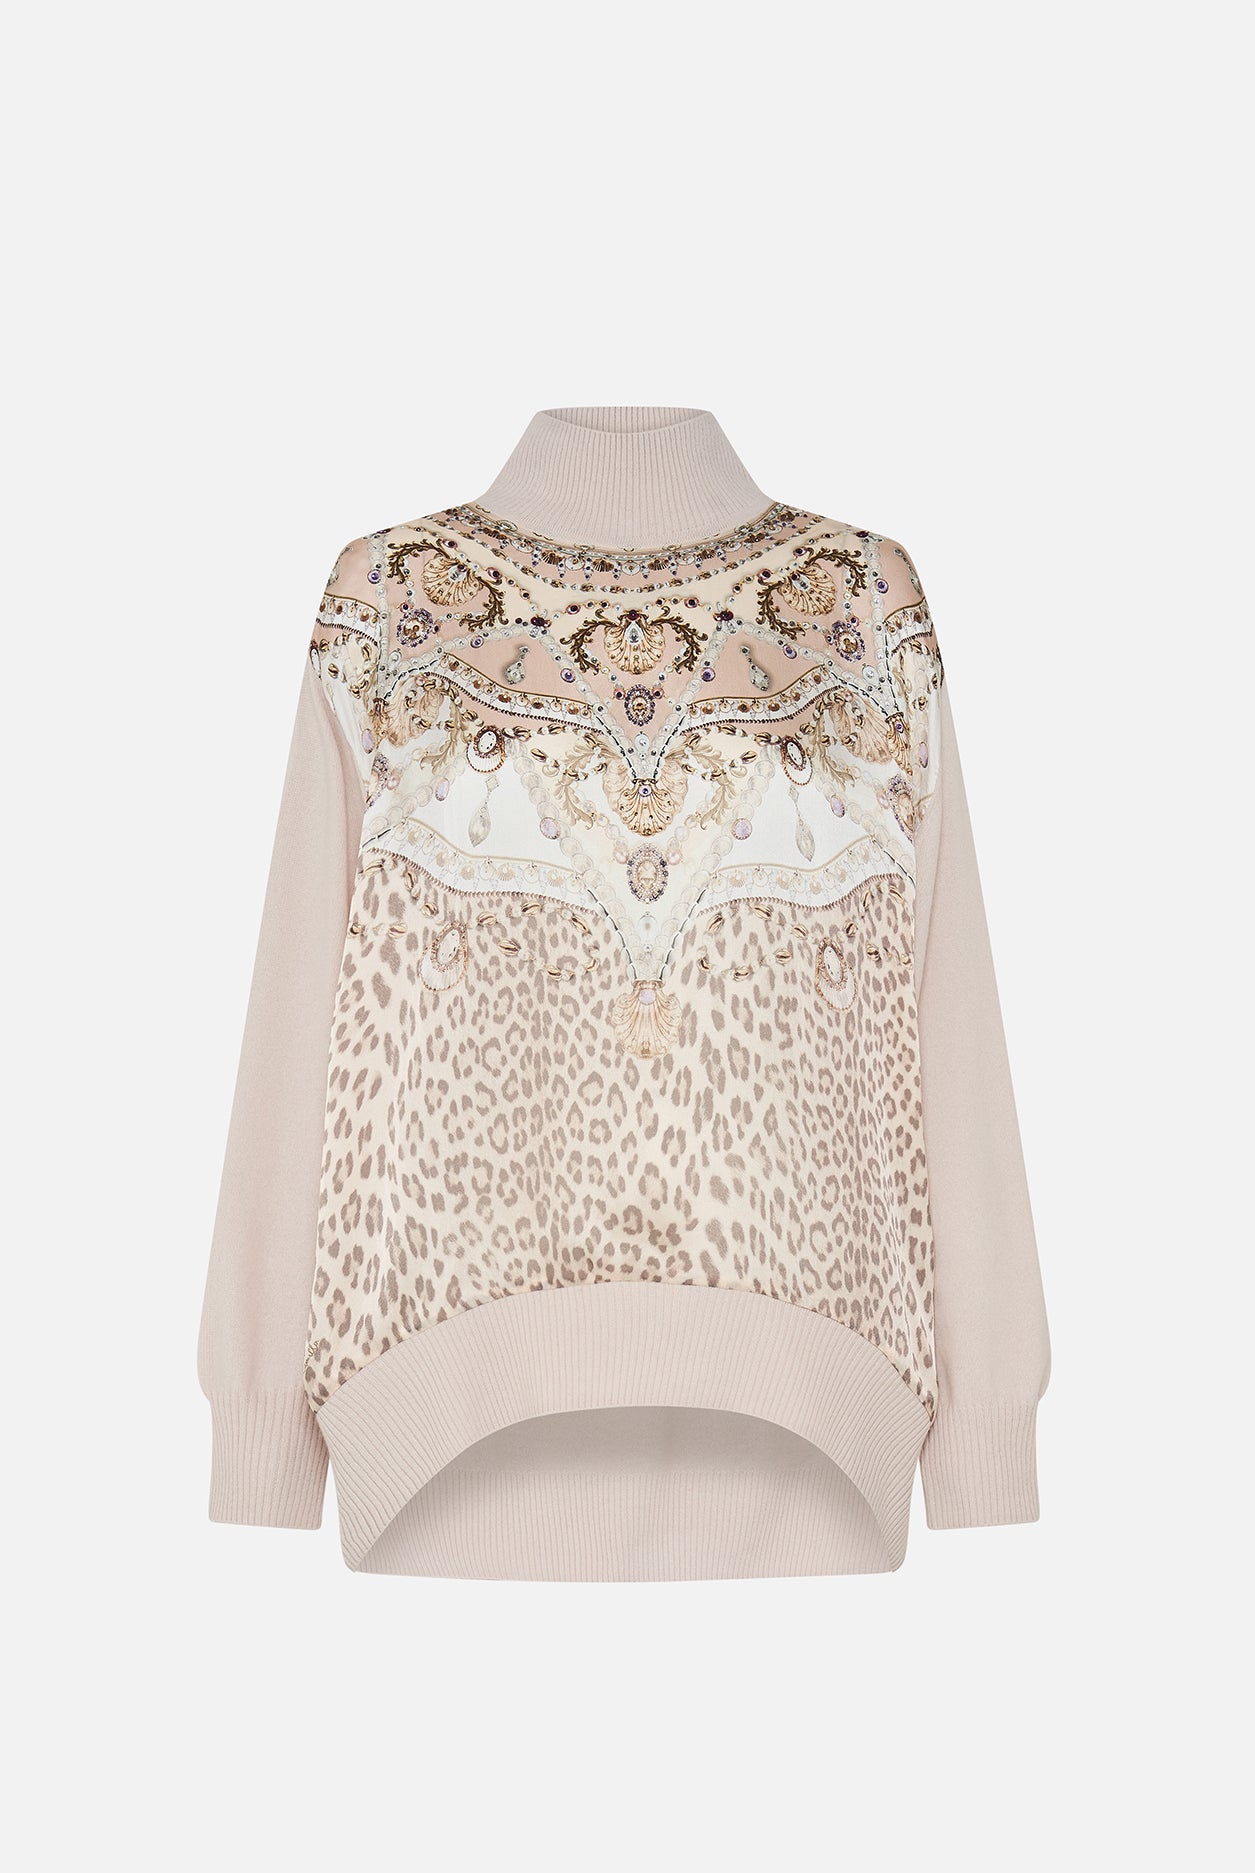 CAMILLA - Silk Front Turtle Neck Knit Grotto Goddess - Magpie Style